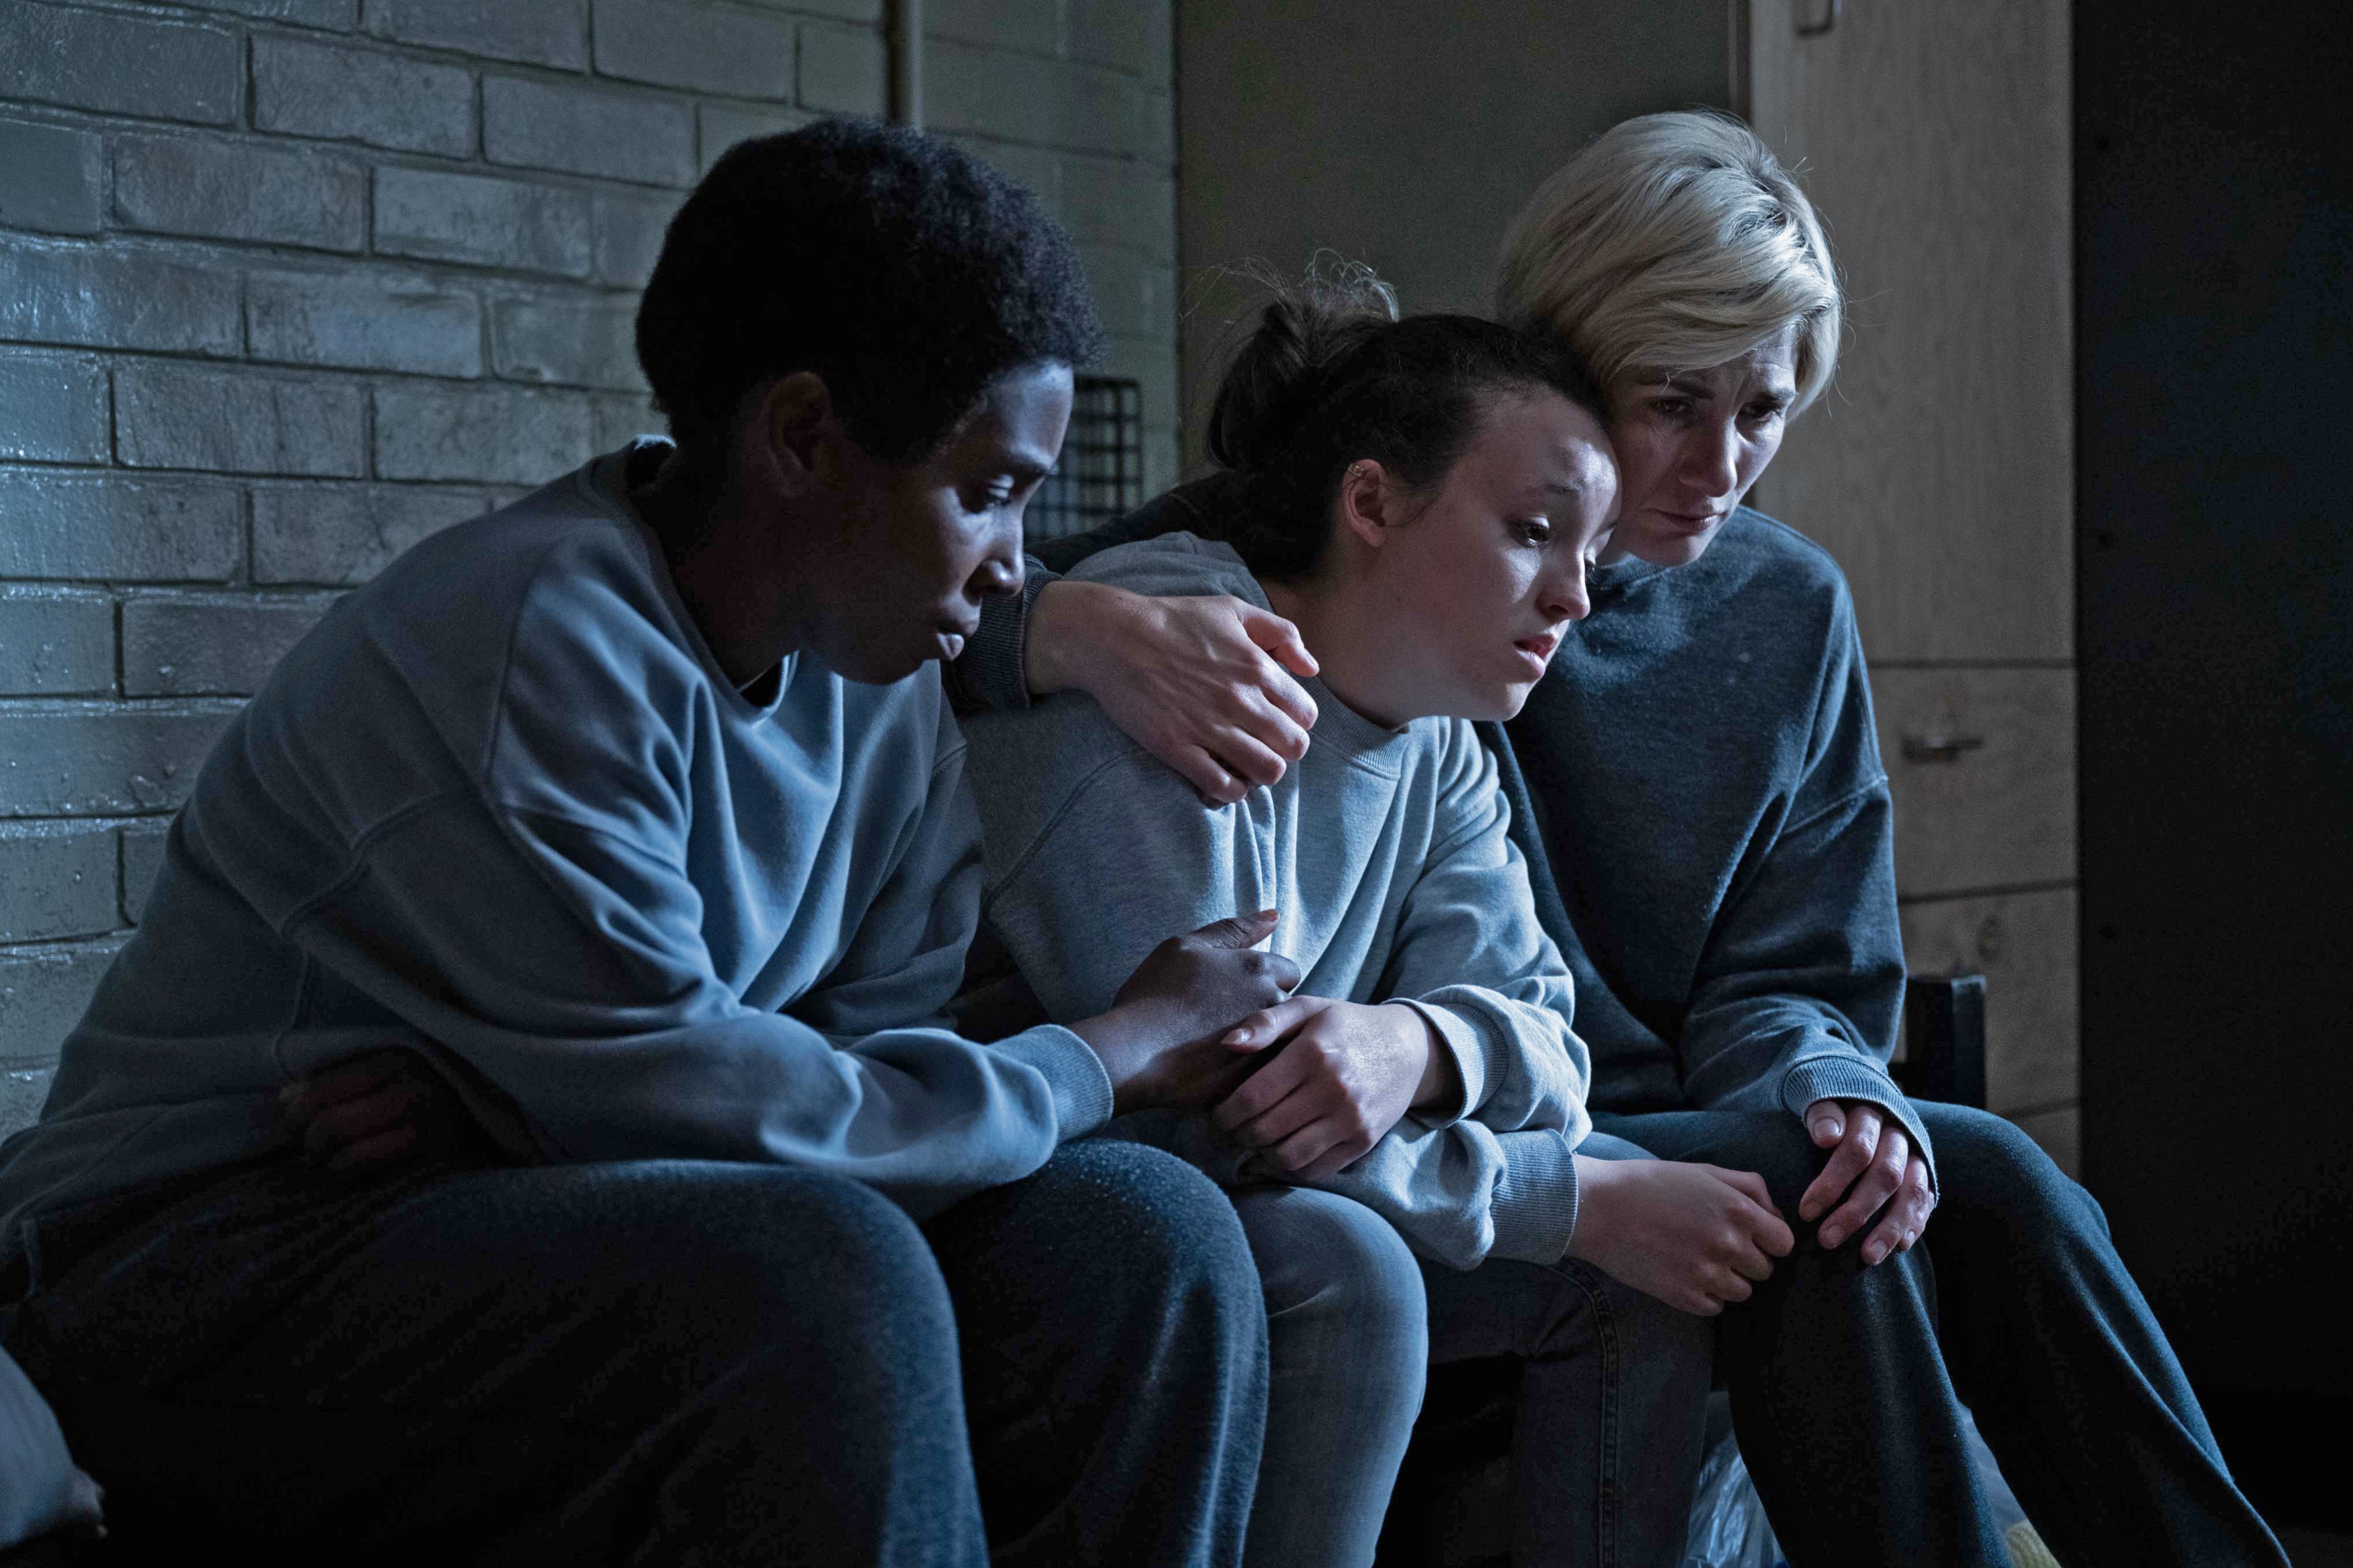 BBC prison drama Time shows the stark differences for female and